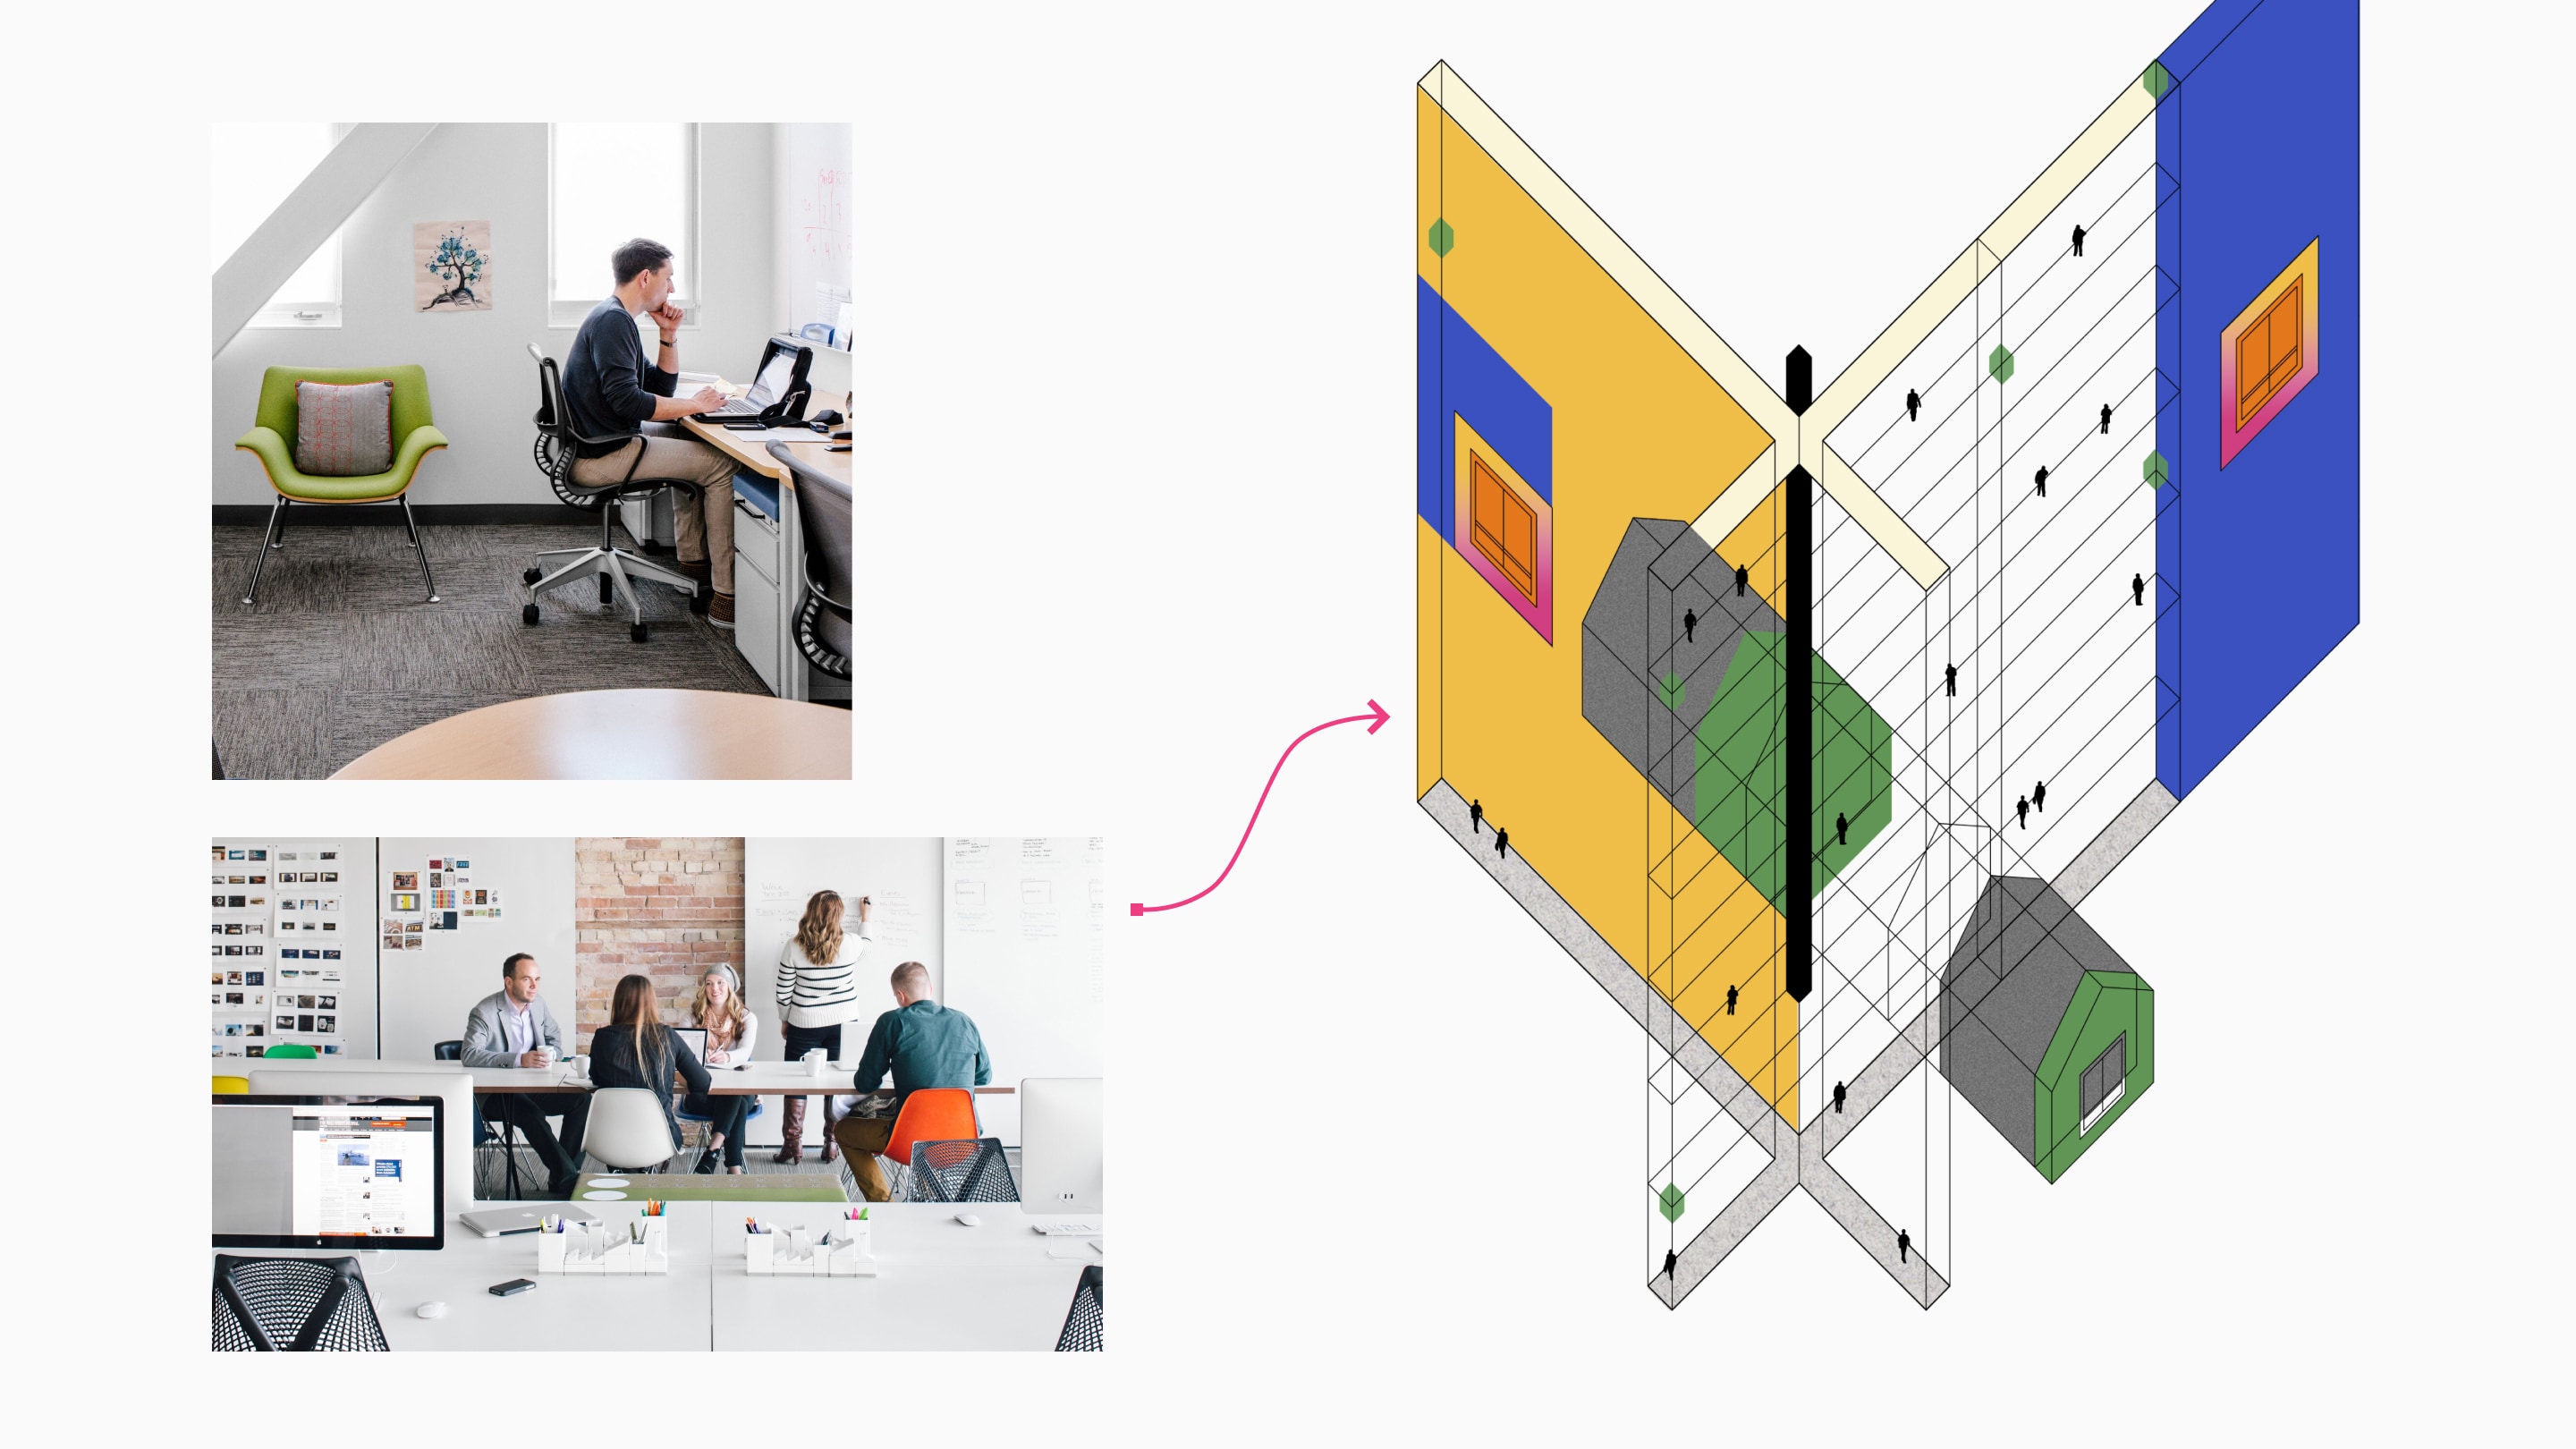 Collage image comprised of 3 images on a white background. The top-left image is of a man sitting in a graphite Setu chair at a workstation with a green Plex chair in the background. The bottom-left image shows people meeting at a seated-height, rectangular conference table with a woman standing, drawing on a whiteboard. The image on the right is a futuristic, bright-coloured illustration representing work space.